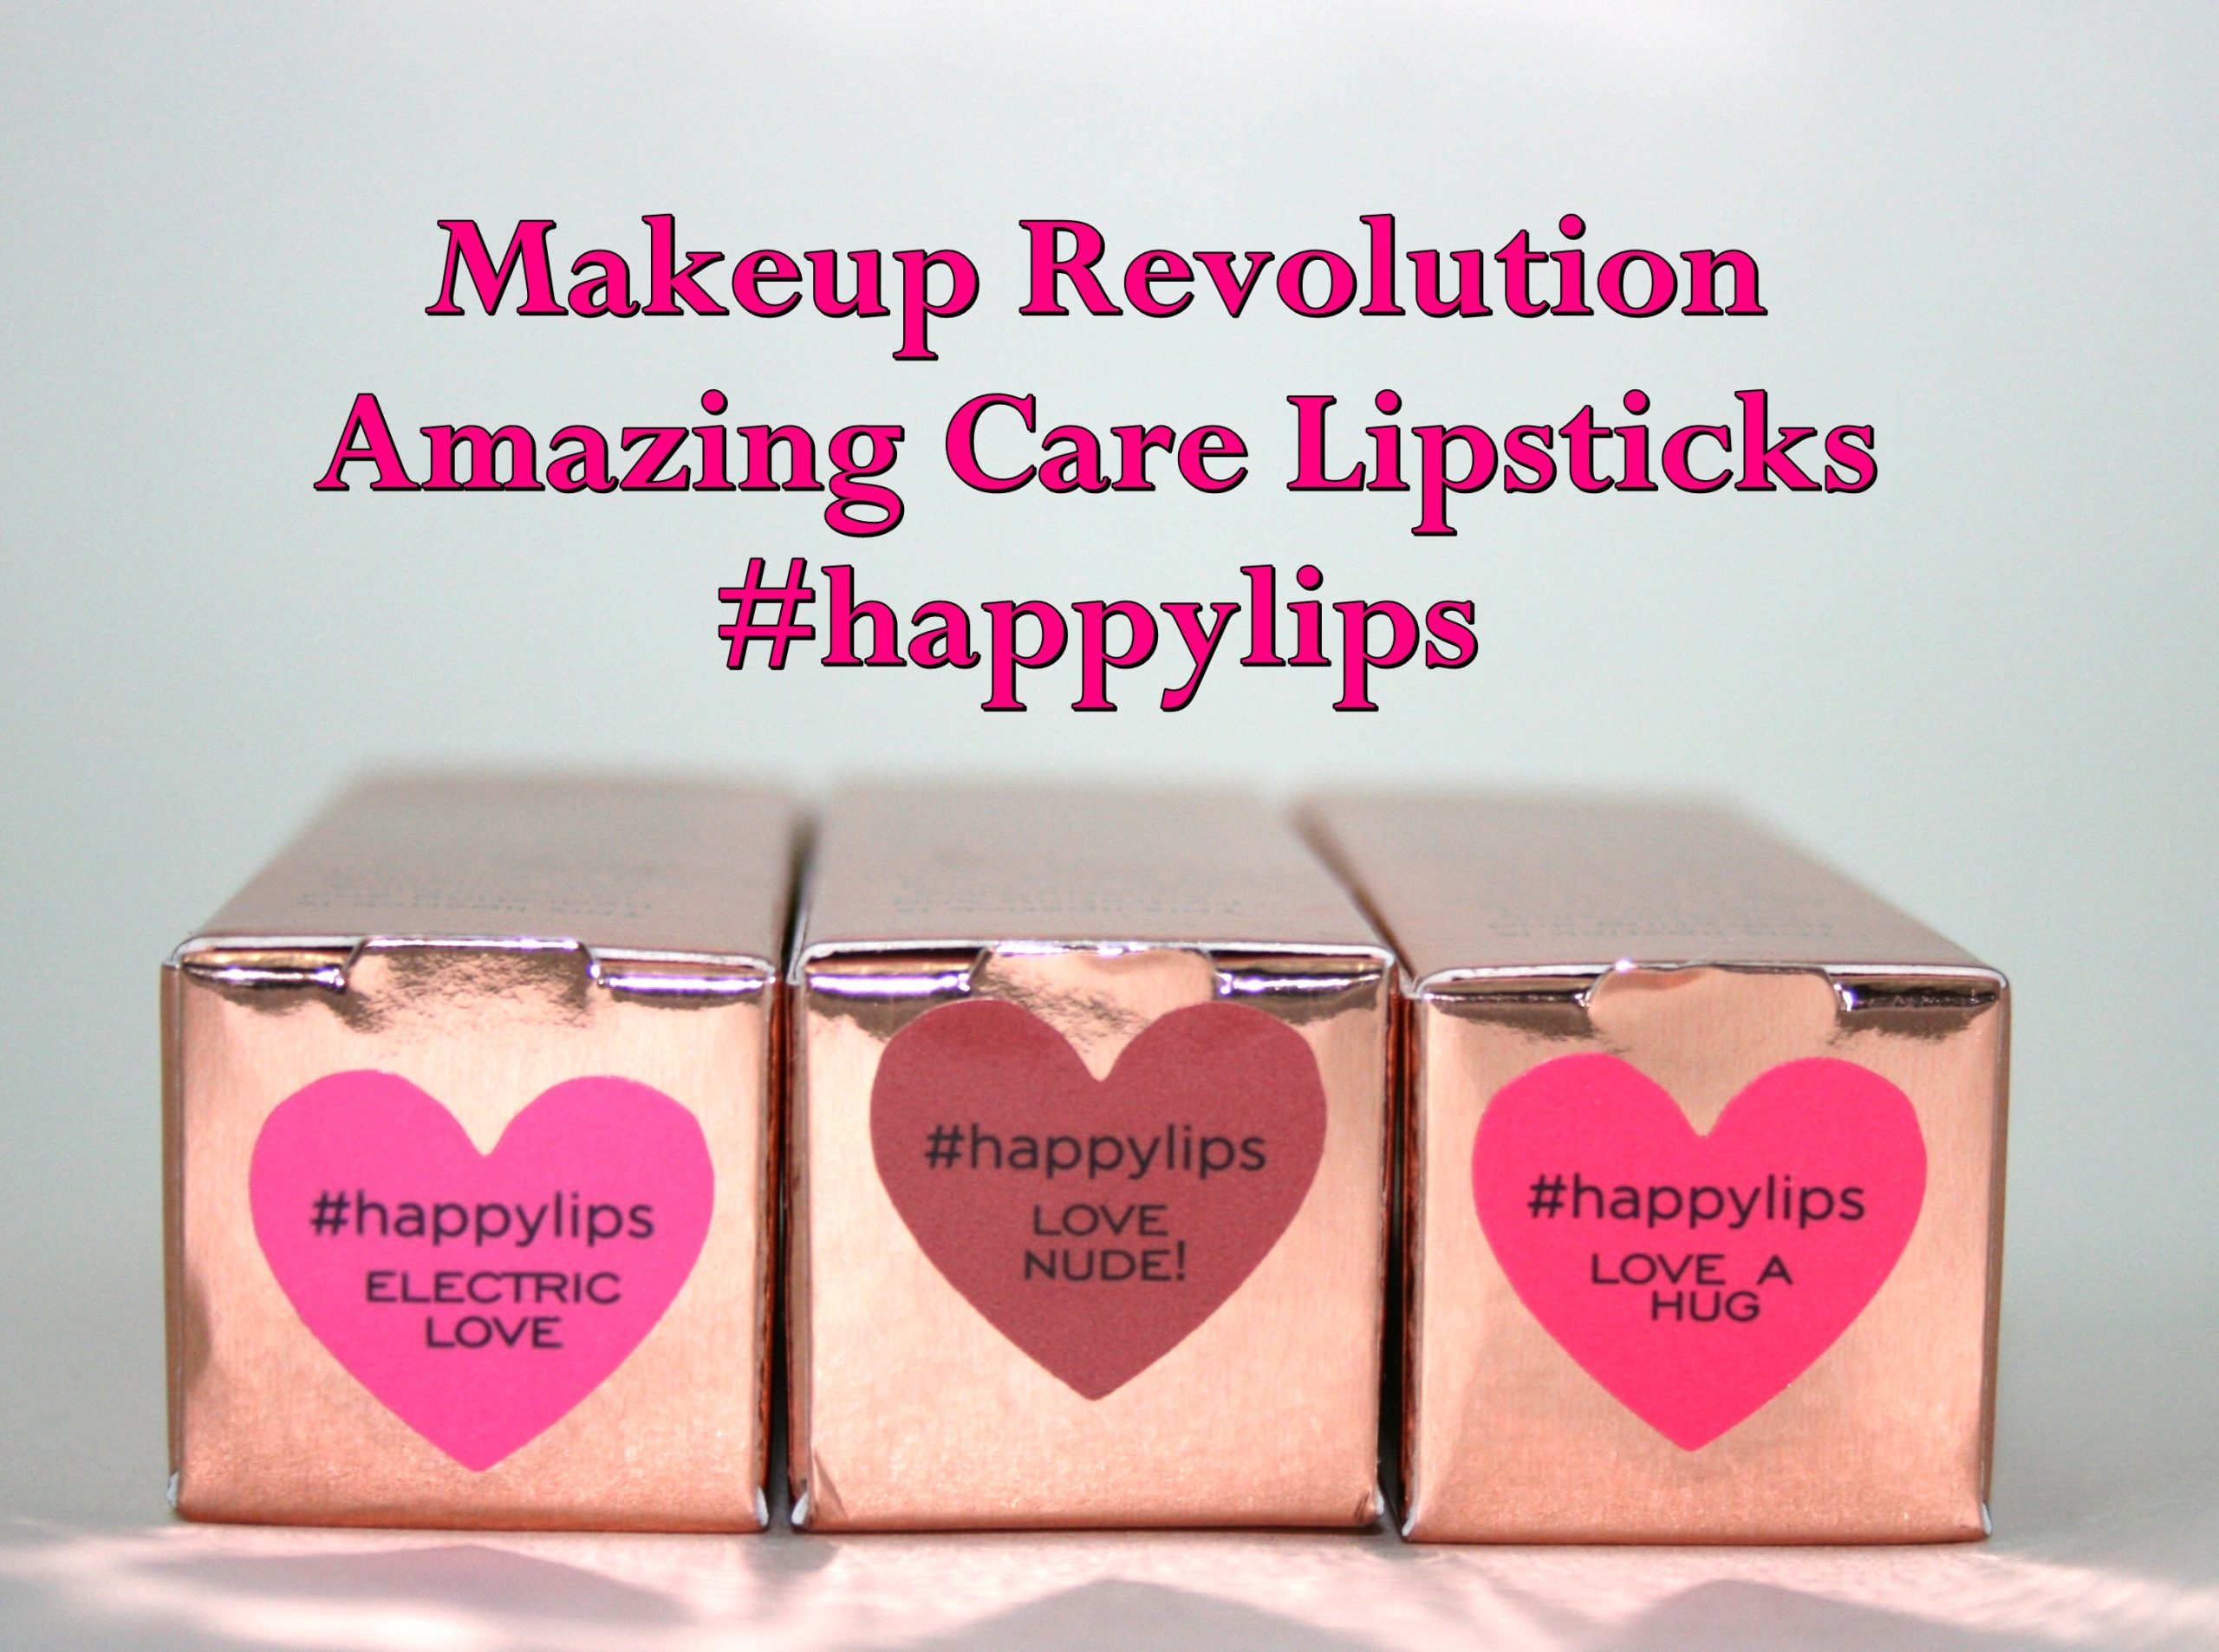 Makeup Revolution Amazing Care Lipstick #happylips in Love a Hug, Love Nude! and Electric Love